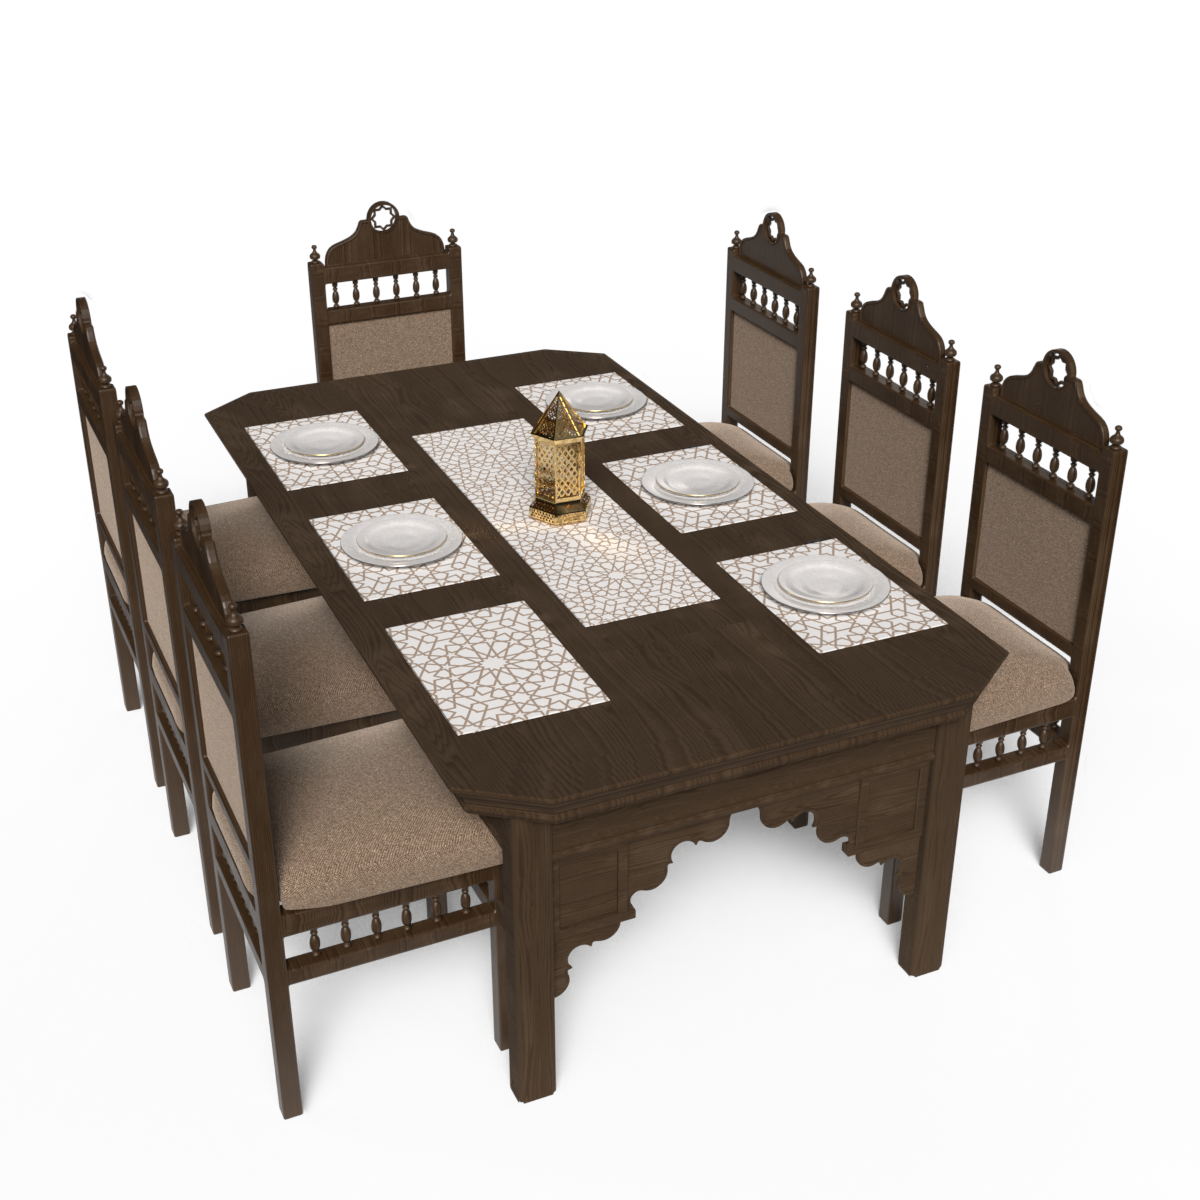 Runner and coaster set - 7 pieces - ROM34